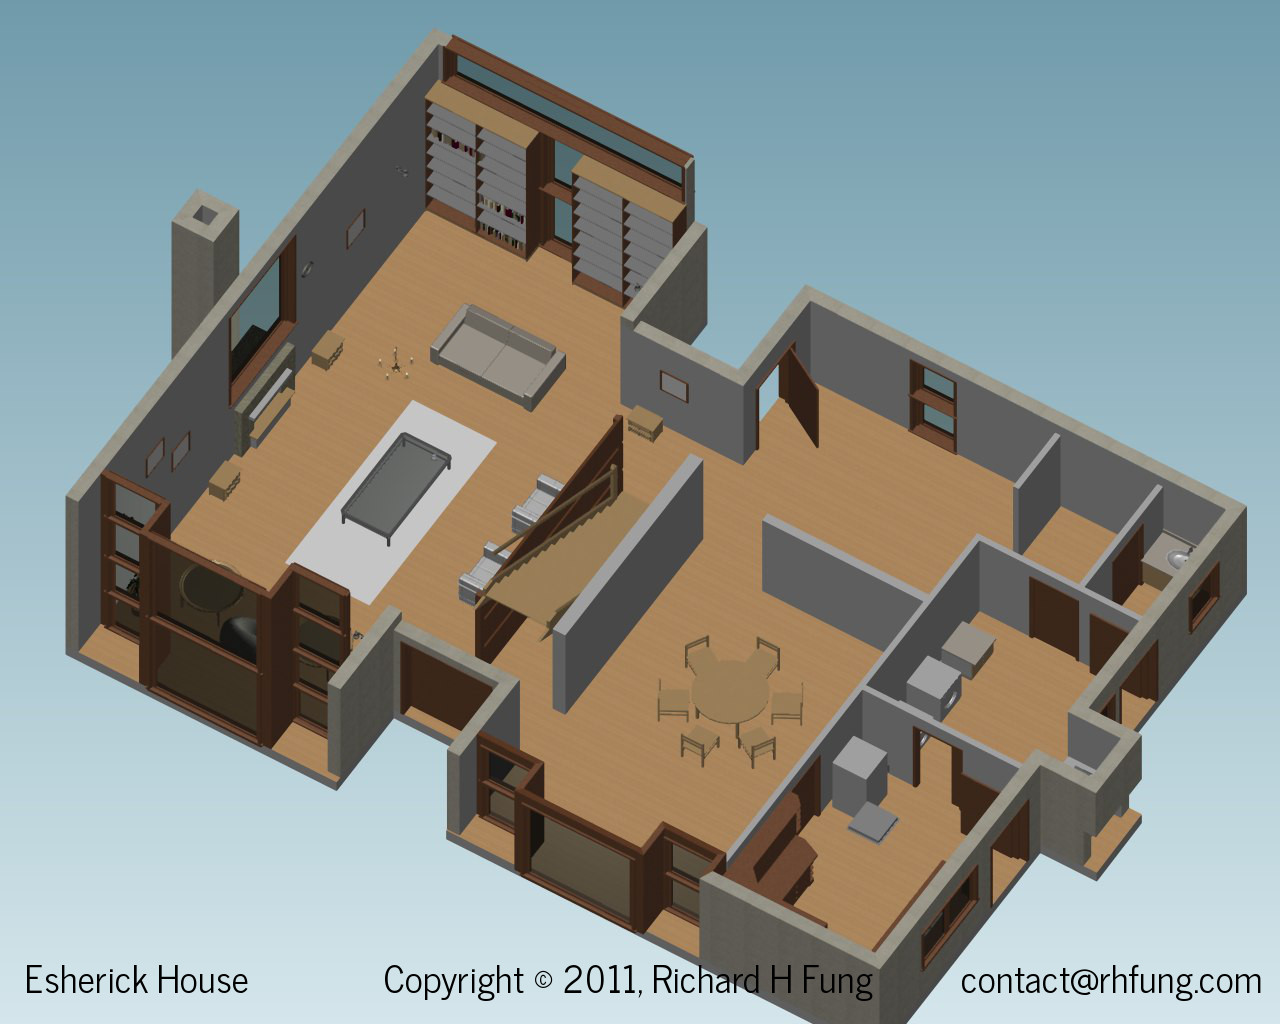 Esherick House isometric view of the first floor